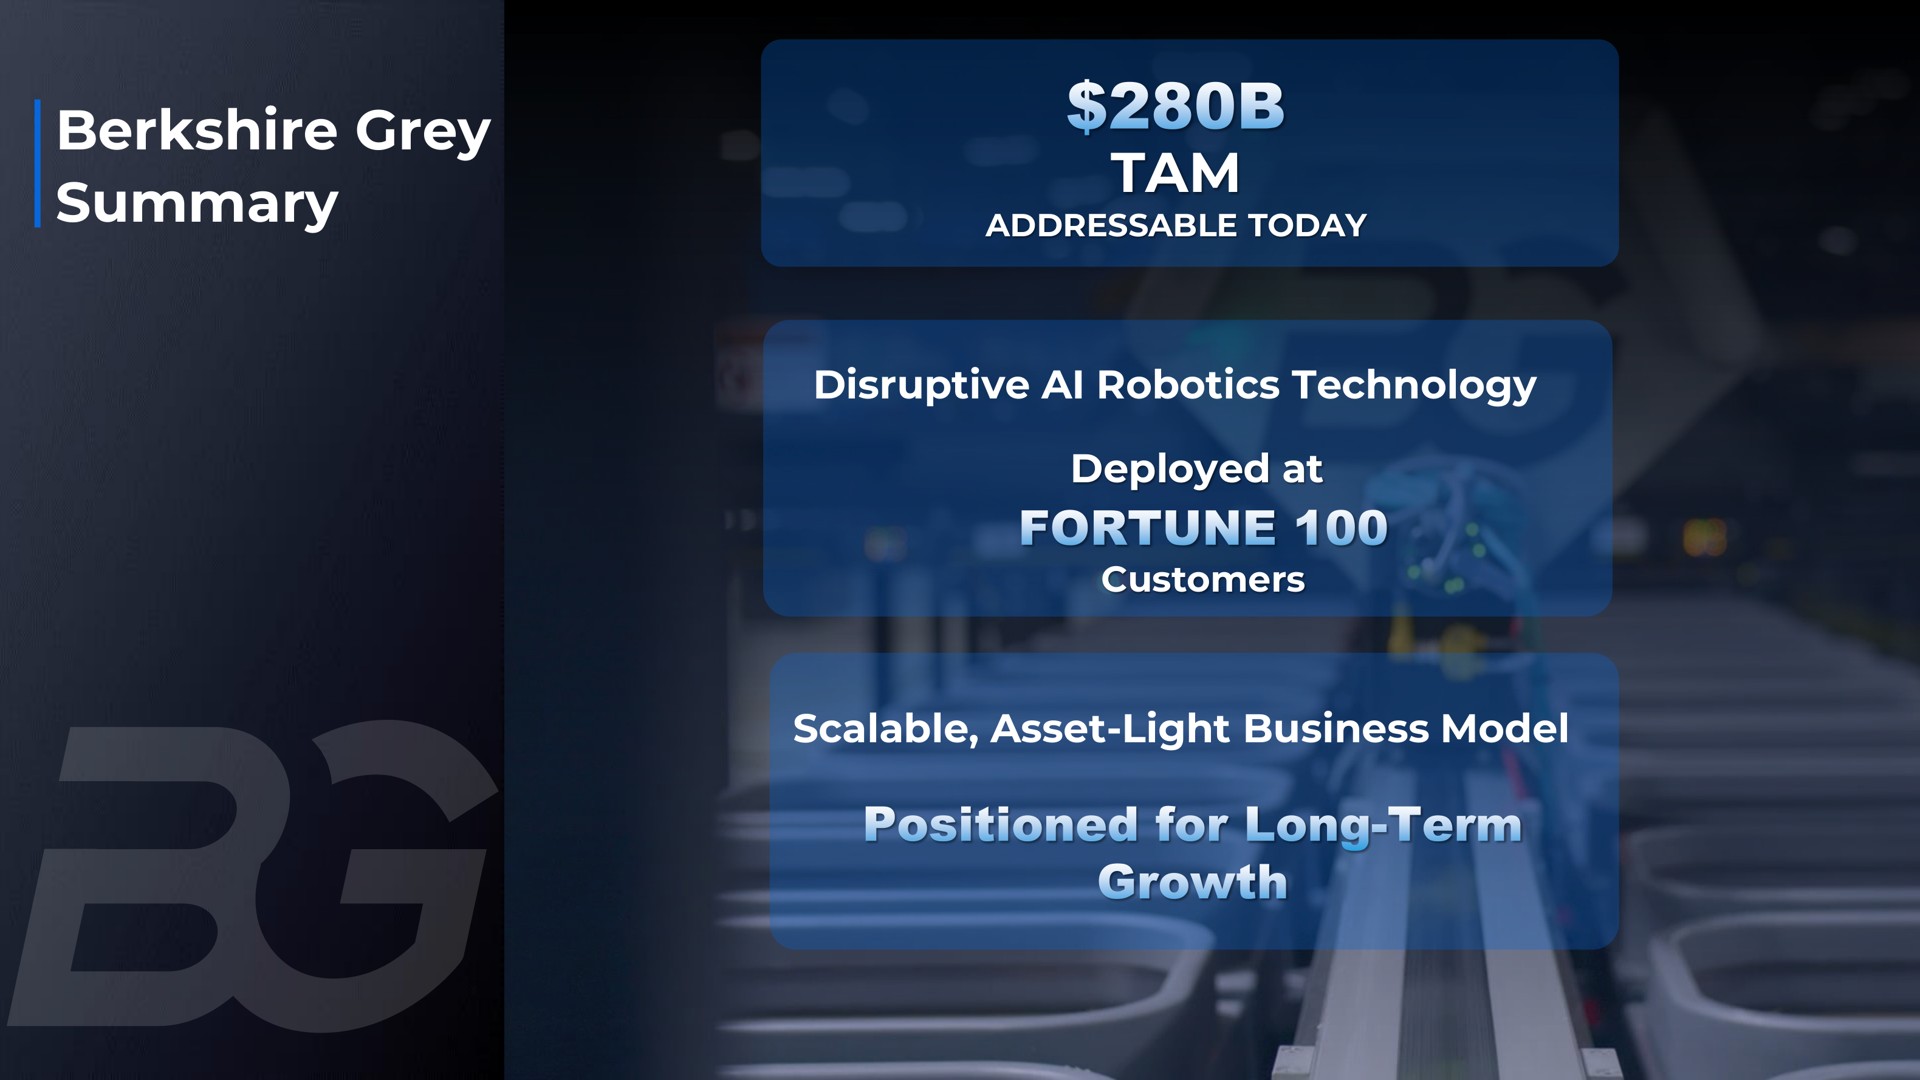 grey summary tam disruptive technology deployed at scalable asset light business model fortune positioned for long term growth | Berkshire Grey